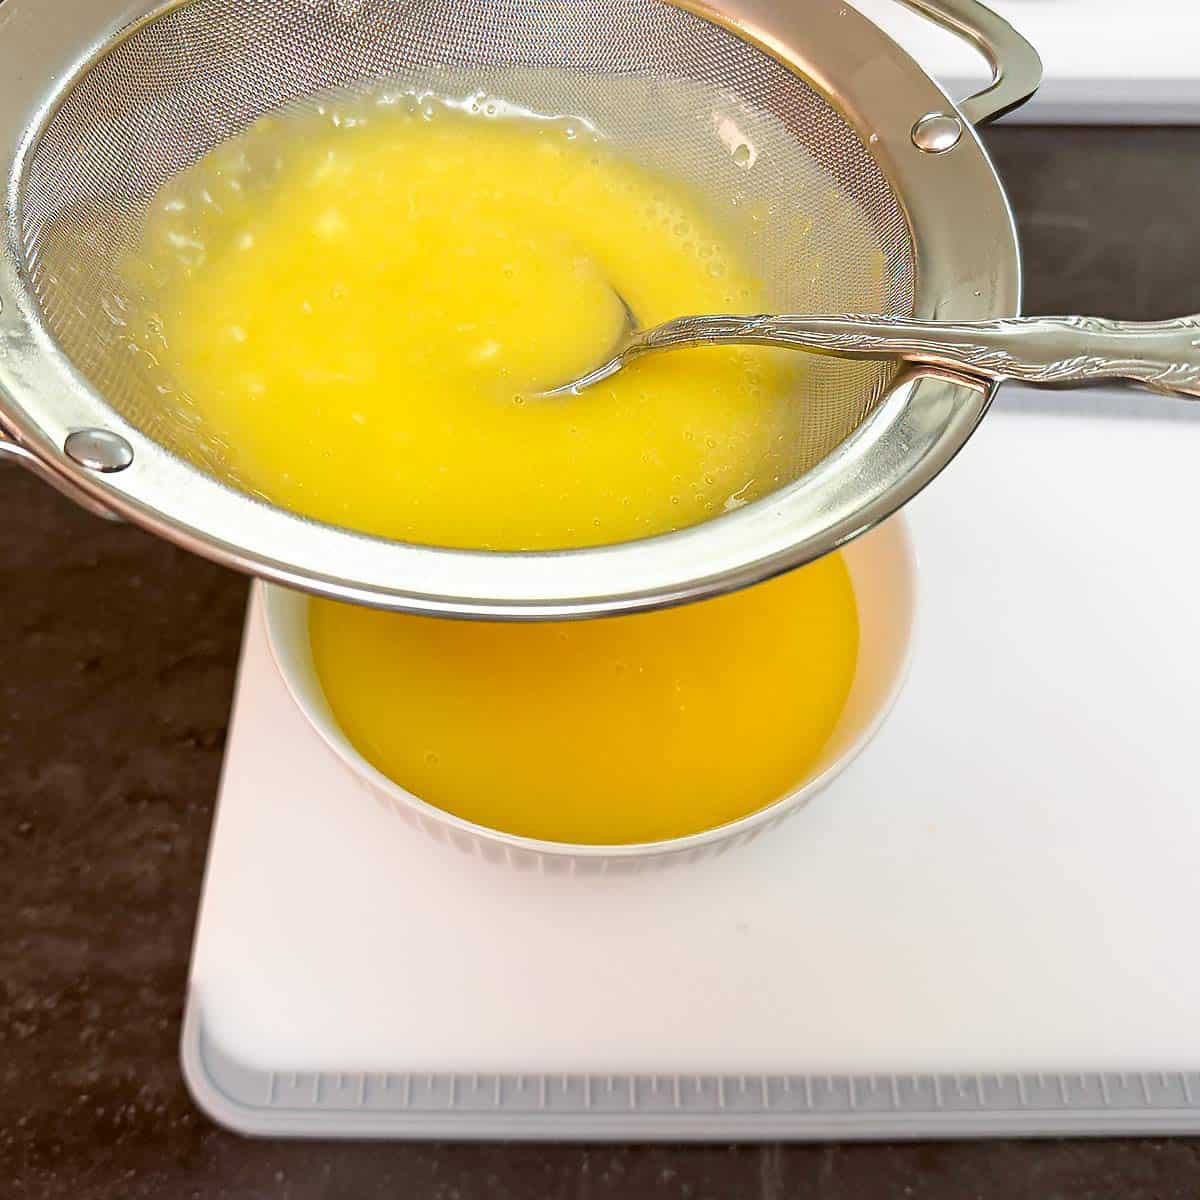 Straining the cooked lemon curd into a bowl.